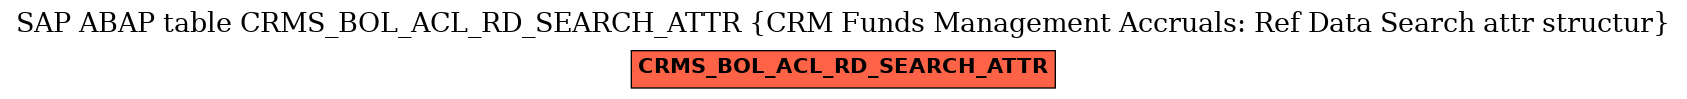 E-R Diagram for table CRMS_BOL_ACL_RD_SEARCH_ATTR (CRM Funds Management Accruals: Ref Data Search attr structur)